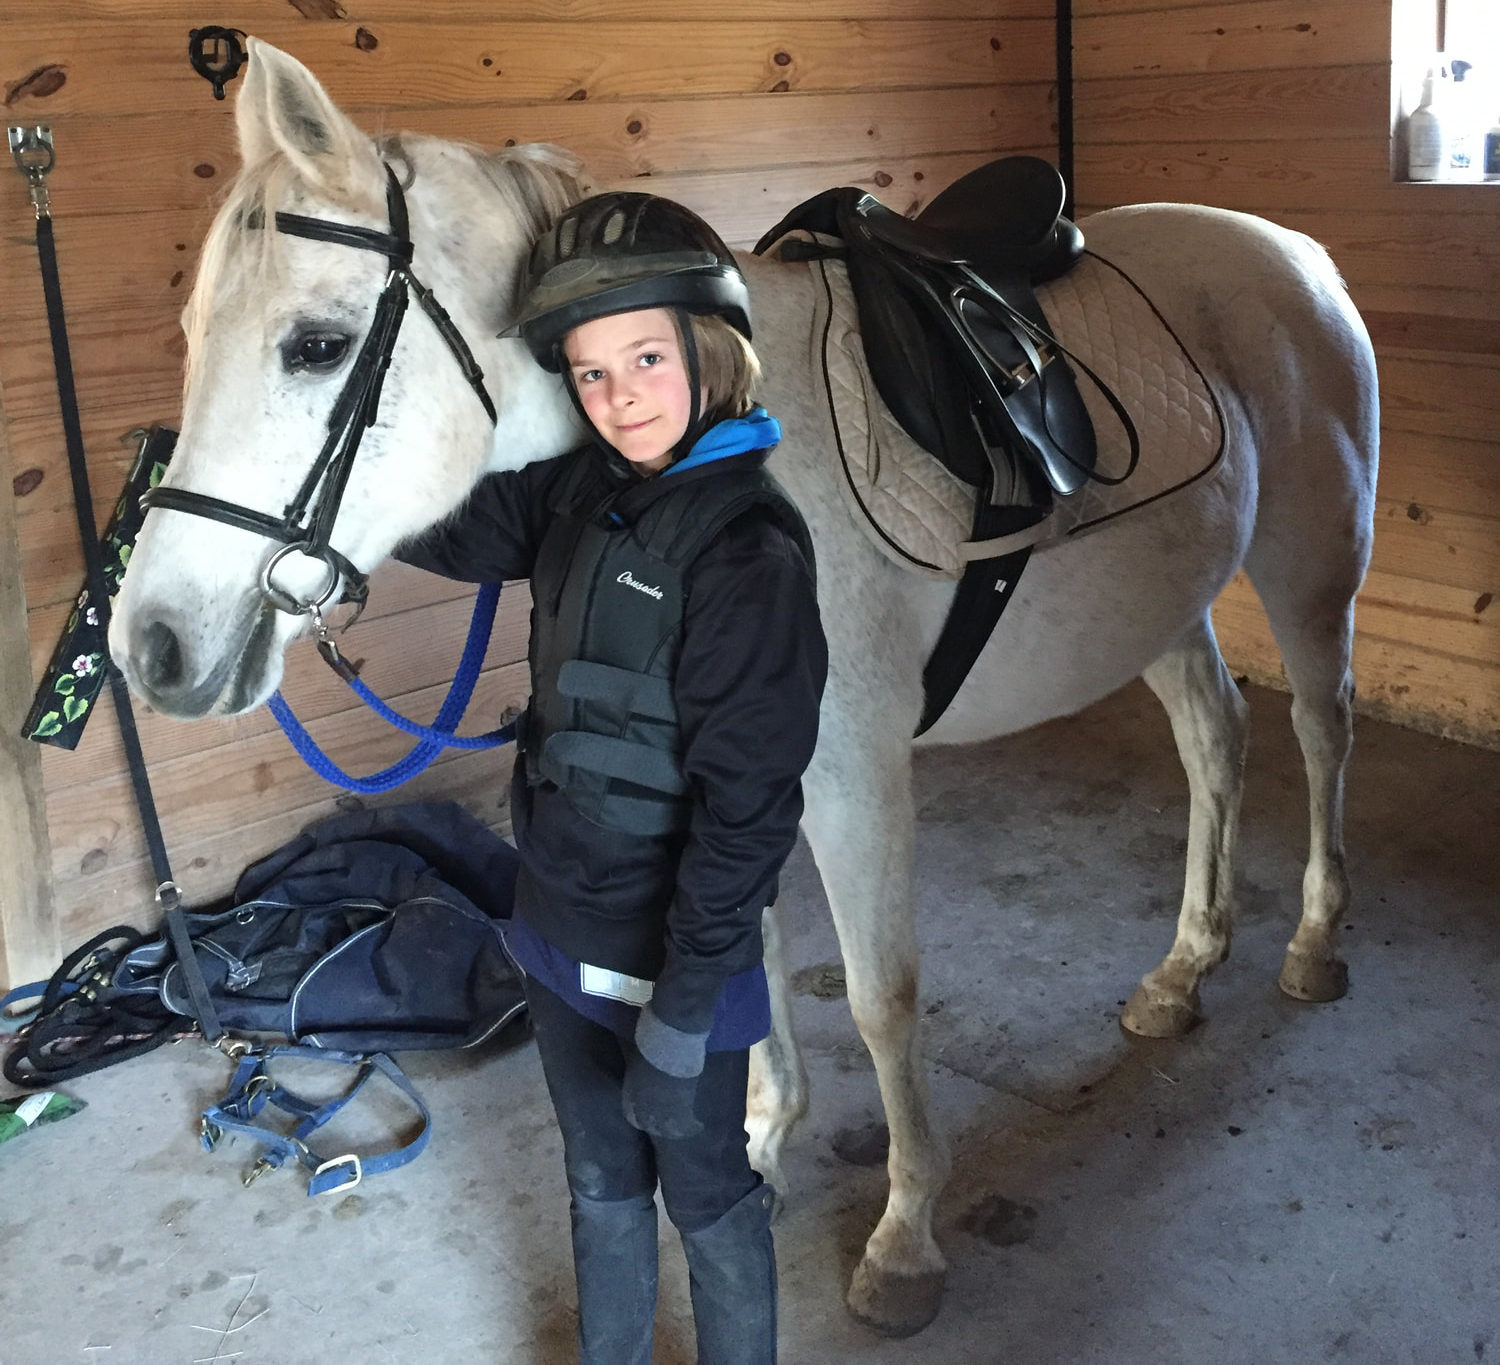 Children and horses can be a natural fit with slow introductions at Mountain Creek Stables. Enjoy horse trail riding in PA.